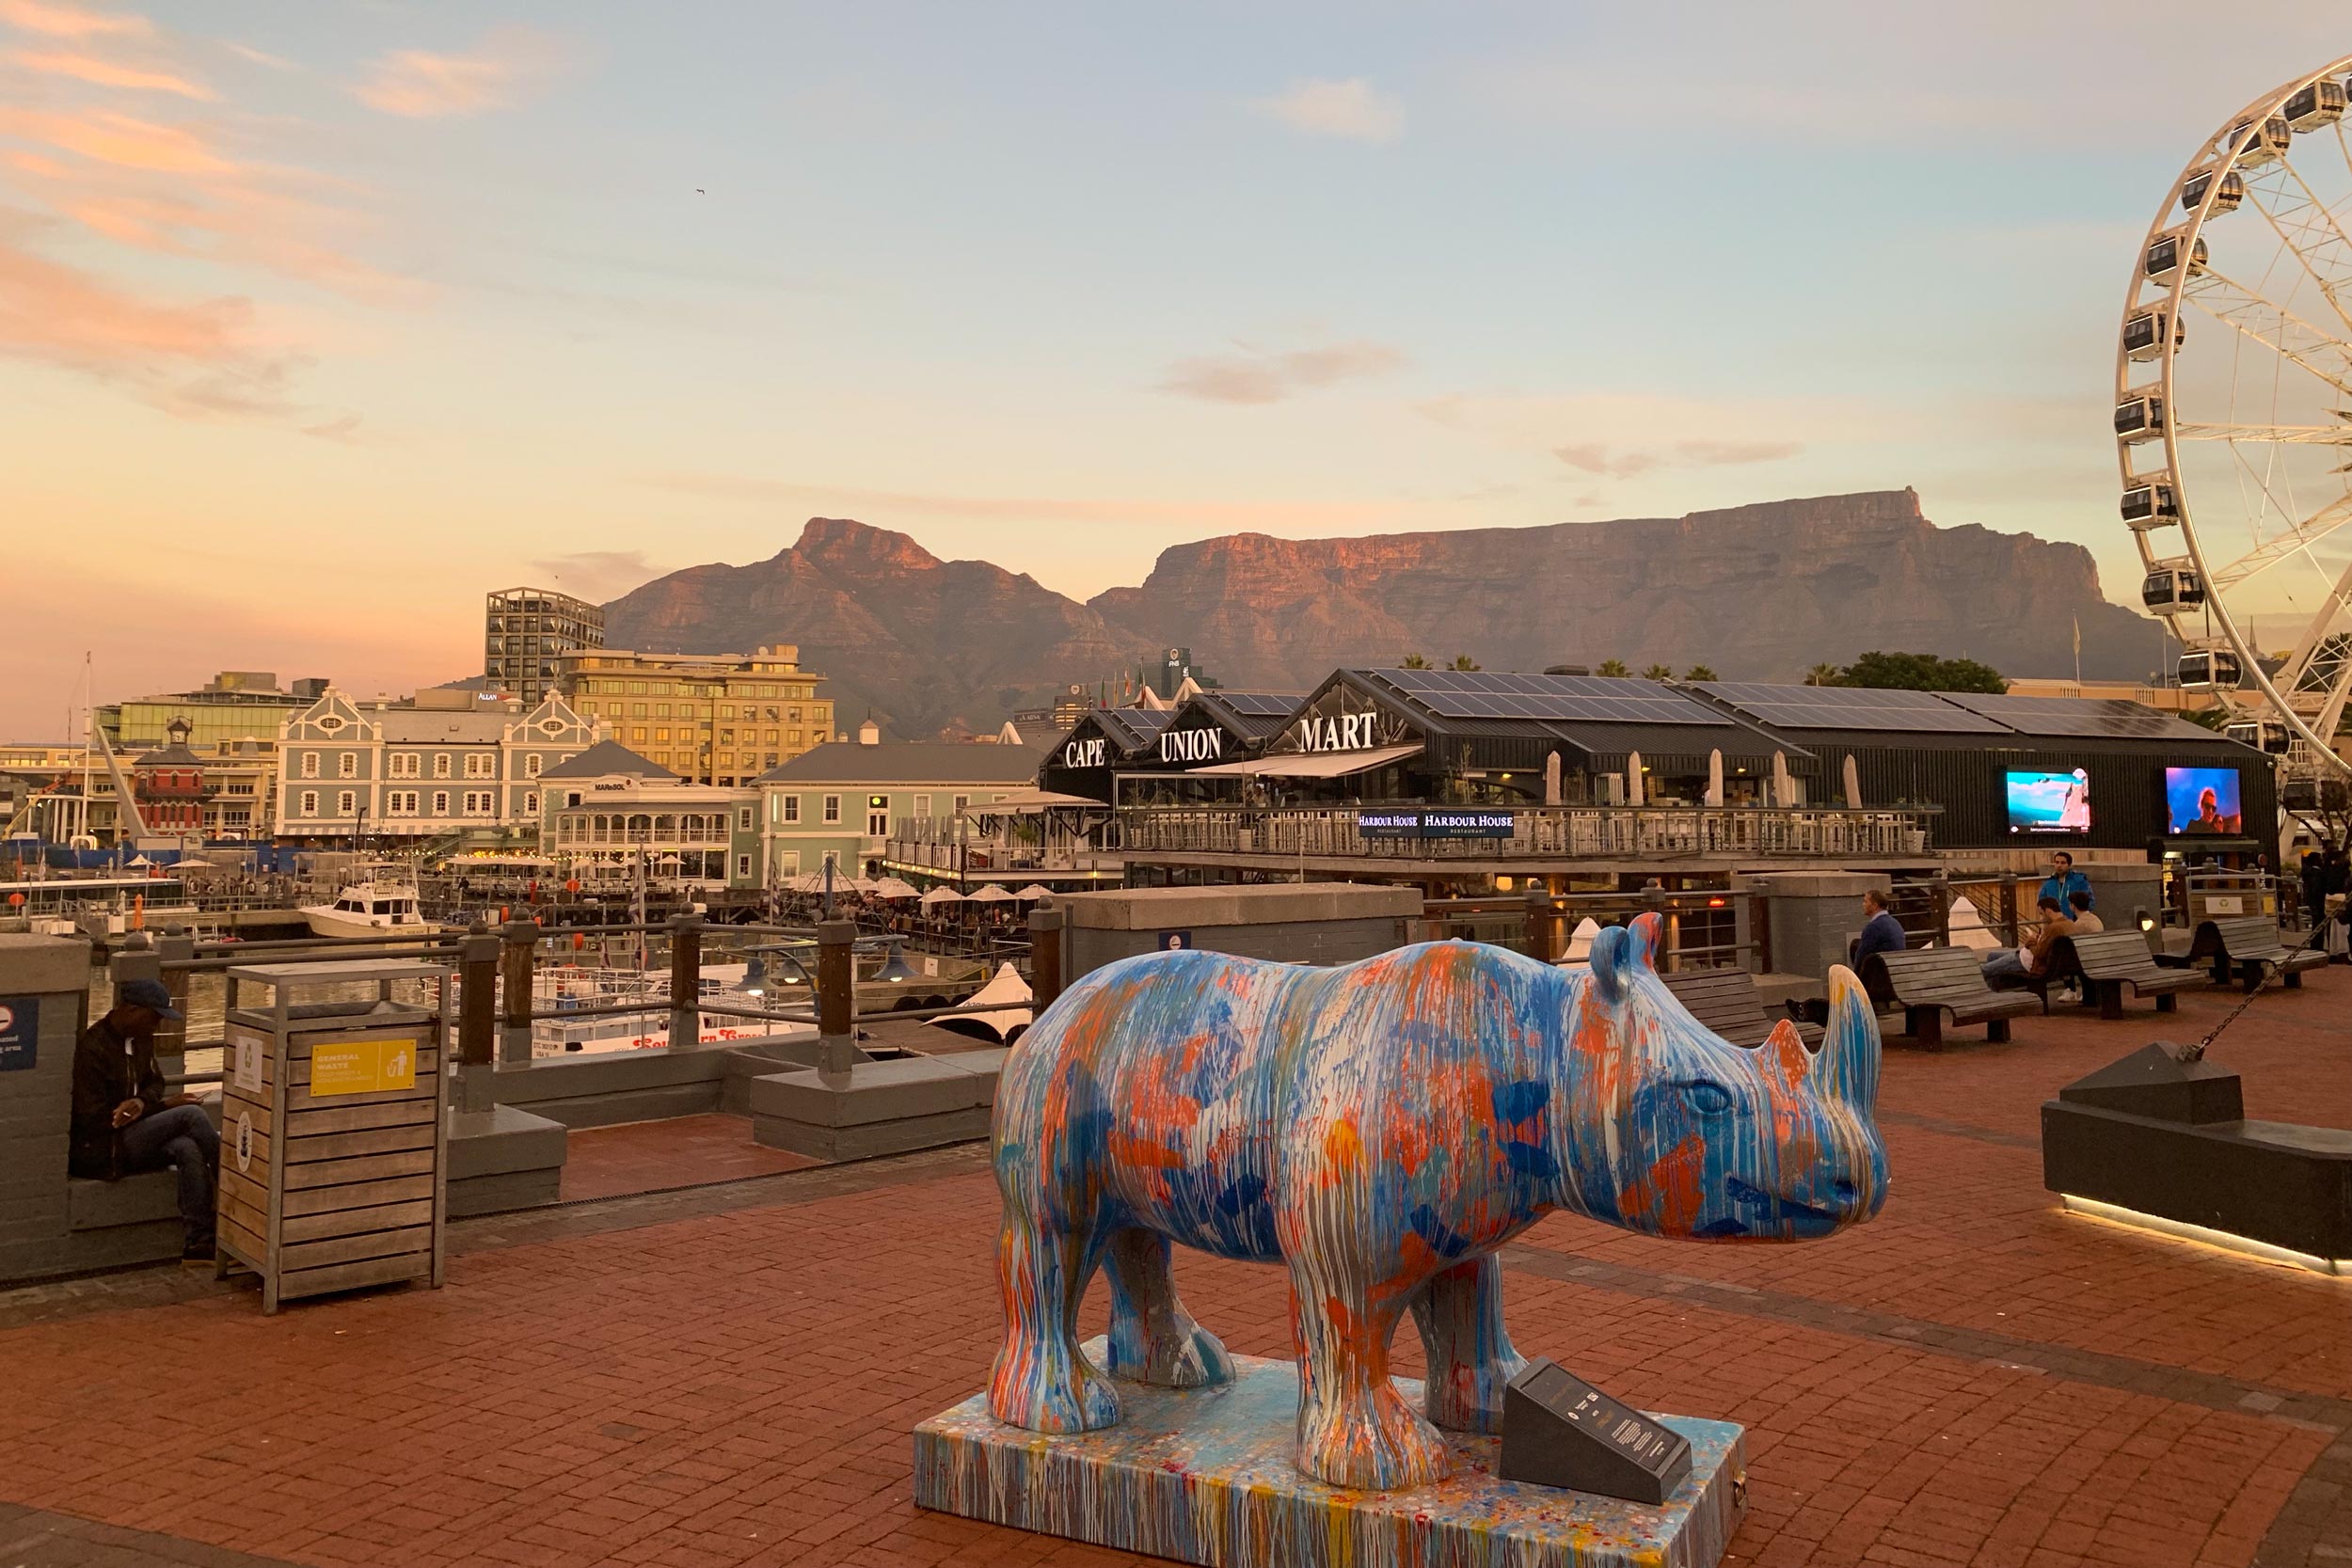 Cape Town, South Africa, port with a multicolored painted rhino